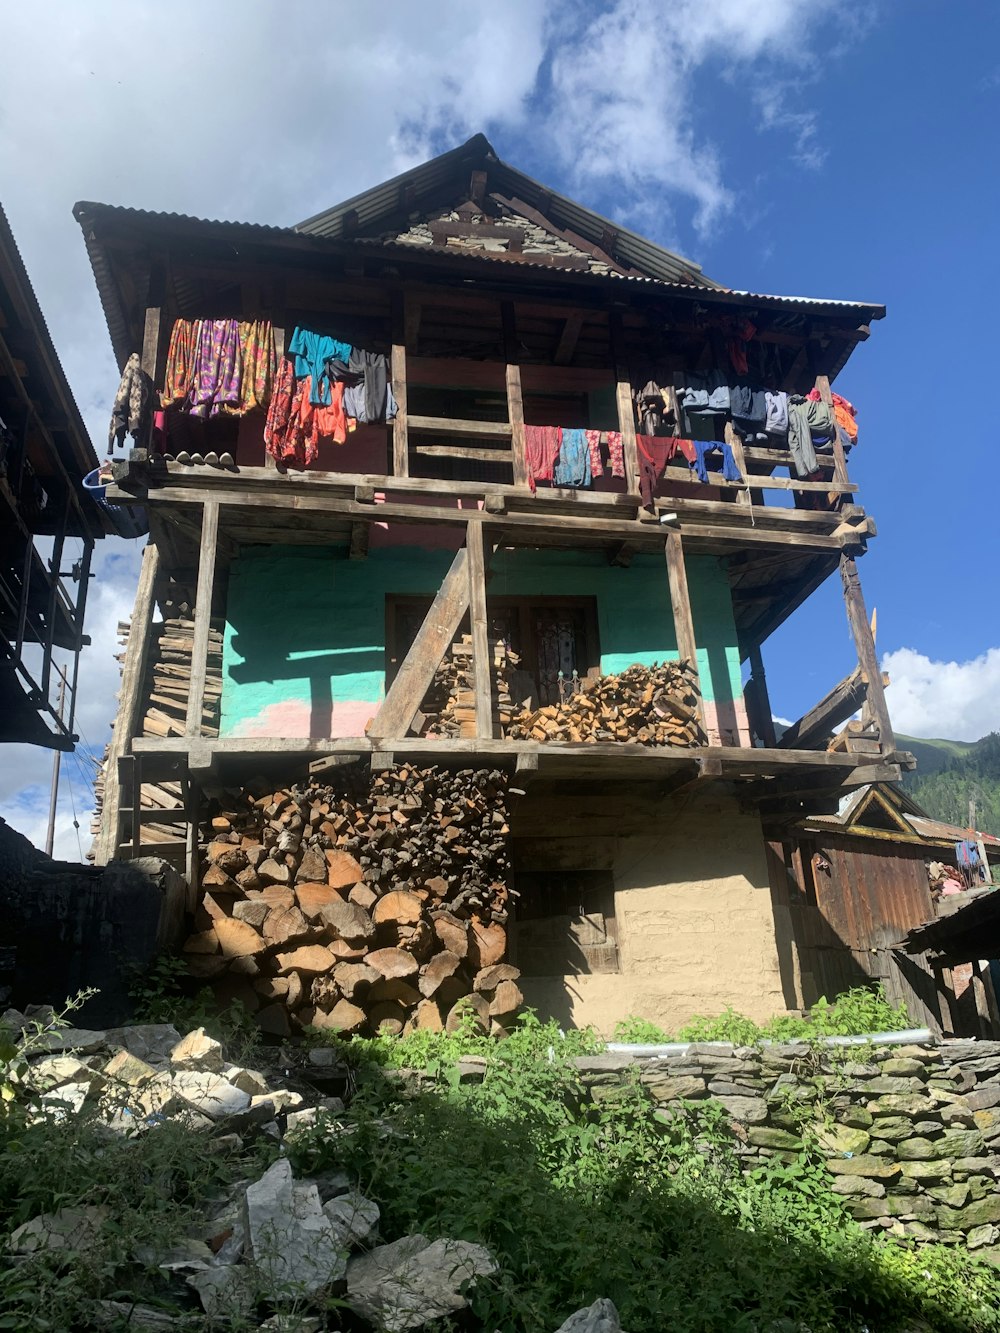 a house with clothes hanging out to dry